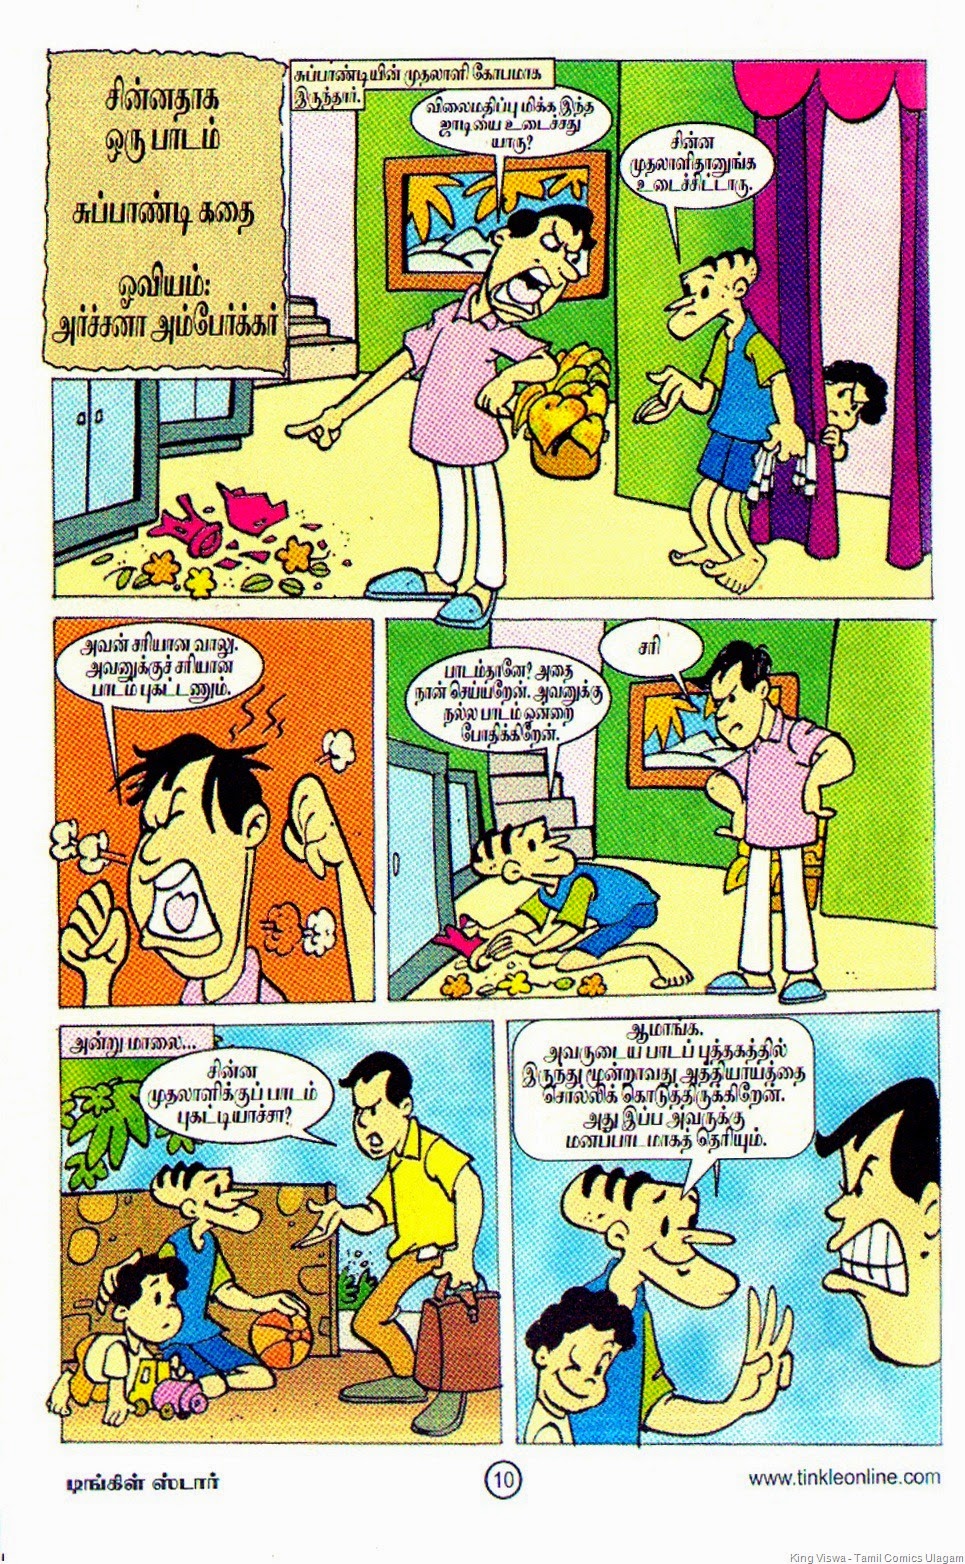 [Tinkle%2520Stars%2520Issue%2520No%25201%2520Dated%252001122014%2520Suppandi%2520Story%2520Page%2520No%252010%255B7%255D.jpg]